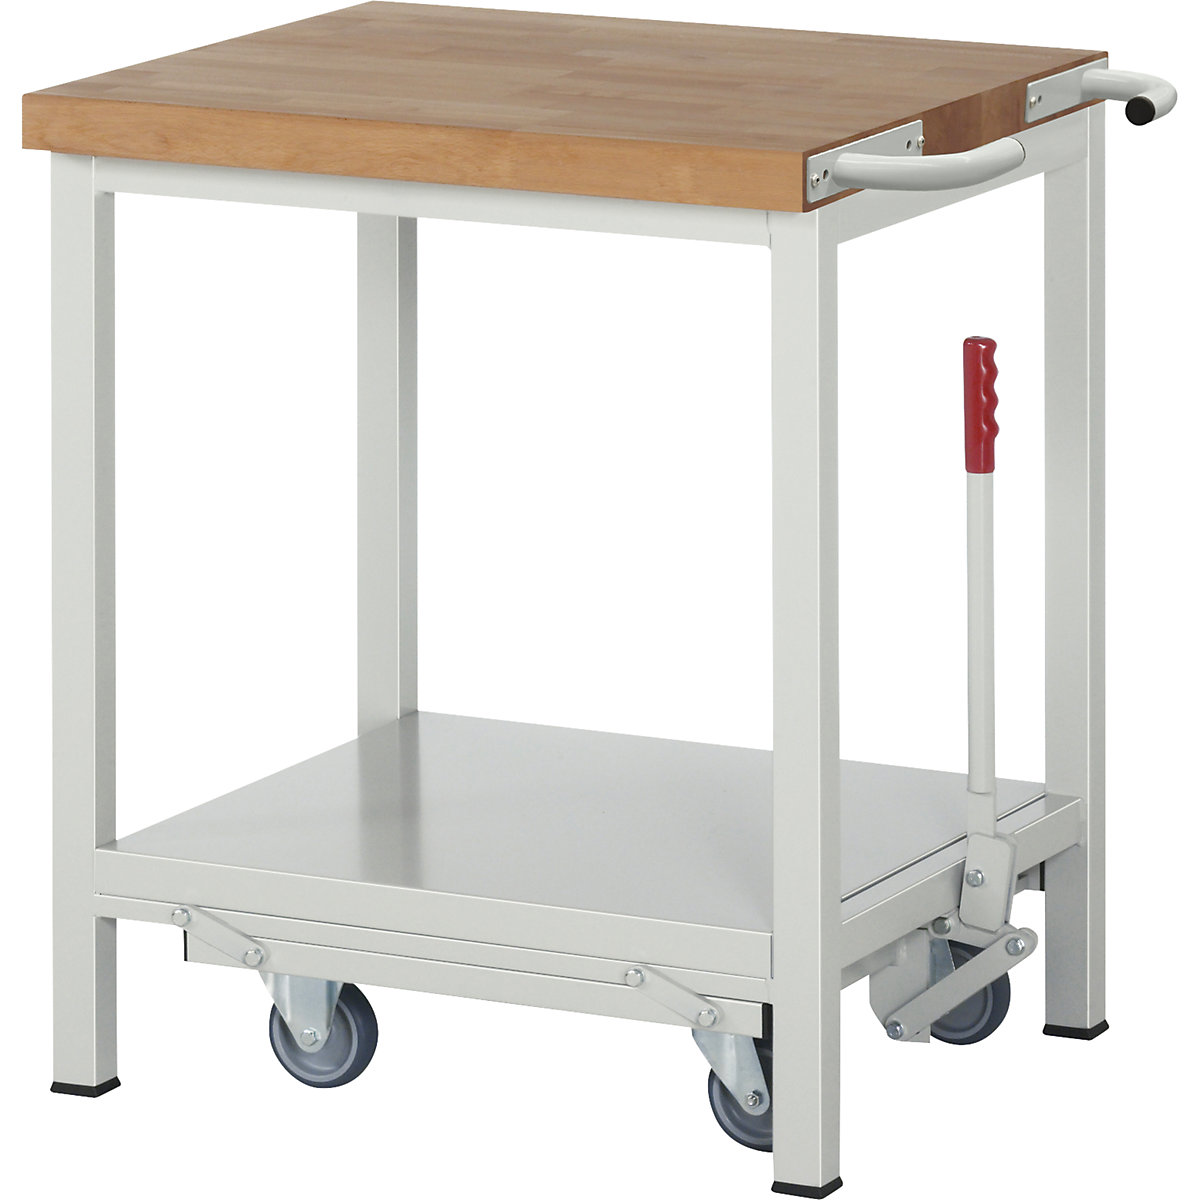 Mobile and lowerable workbench, Series 8 frame construction - eurokraft pro